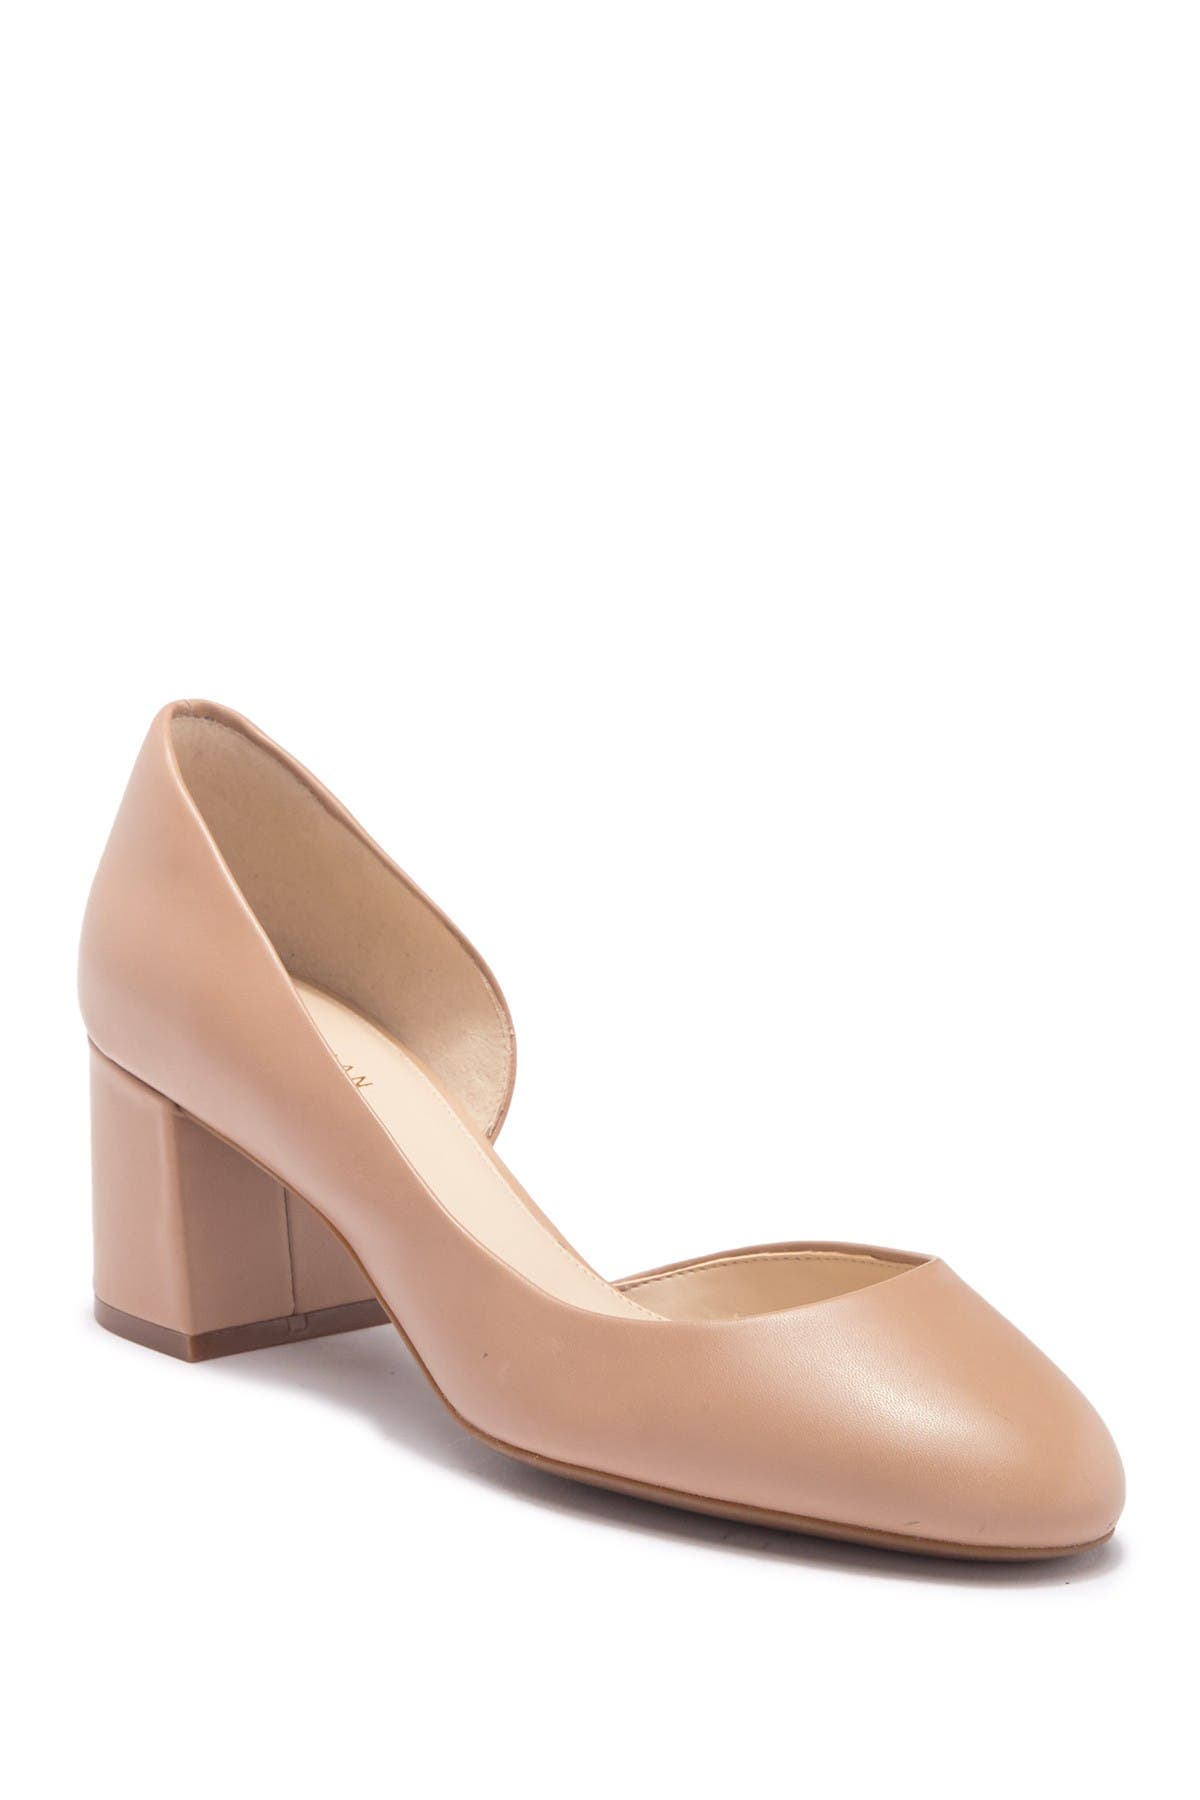 cole haan leather pumps